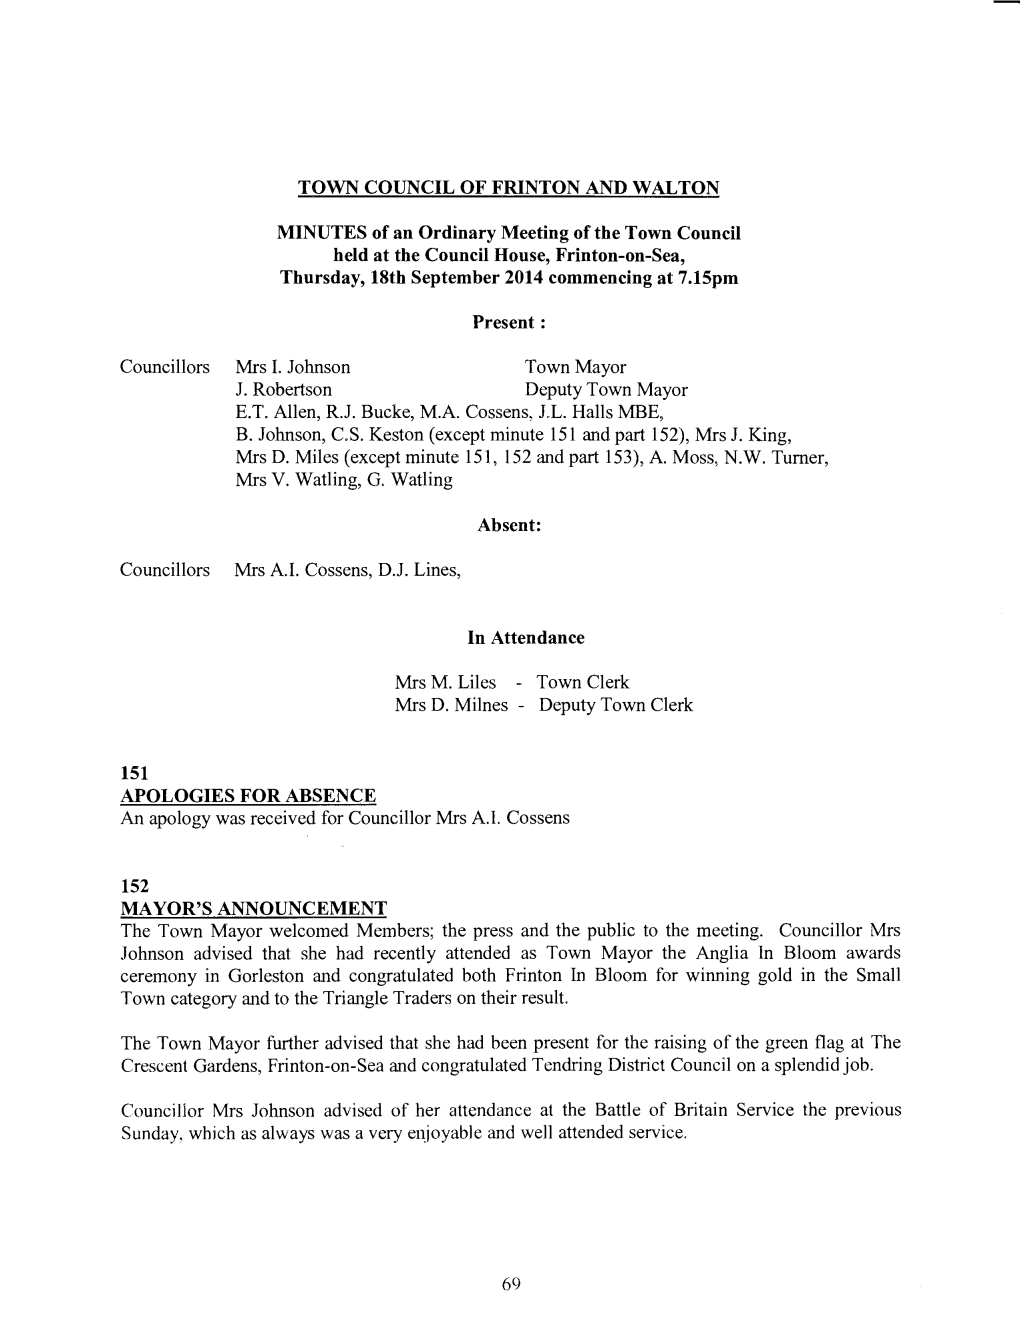 TOWN COUNCIL of FRINTON and WALTON MINUTES of an Ordinary